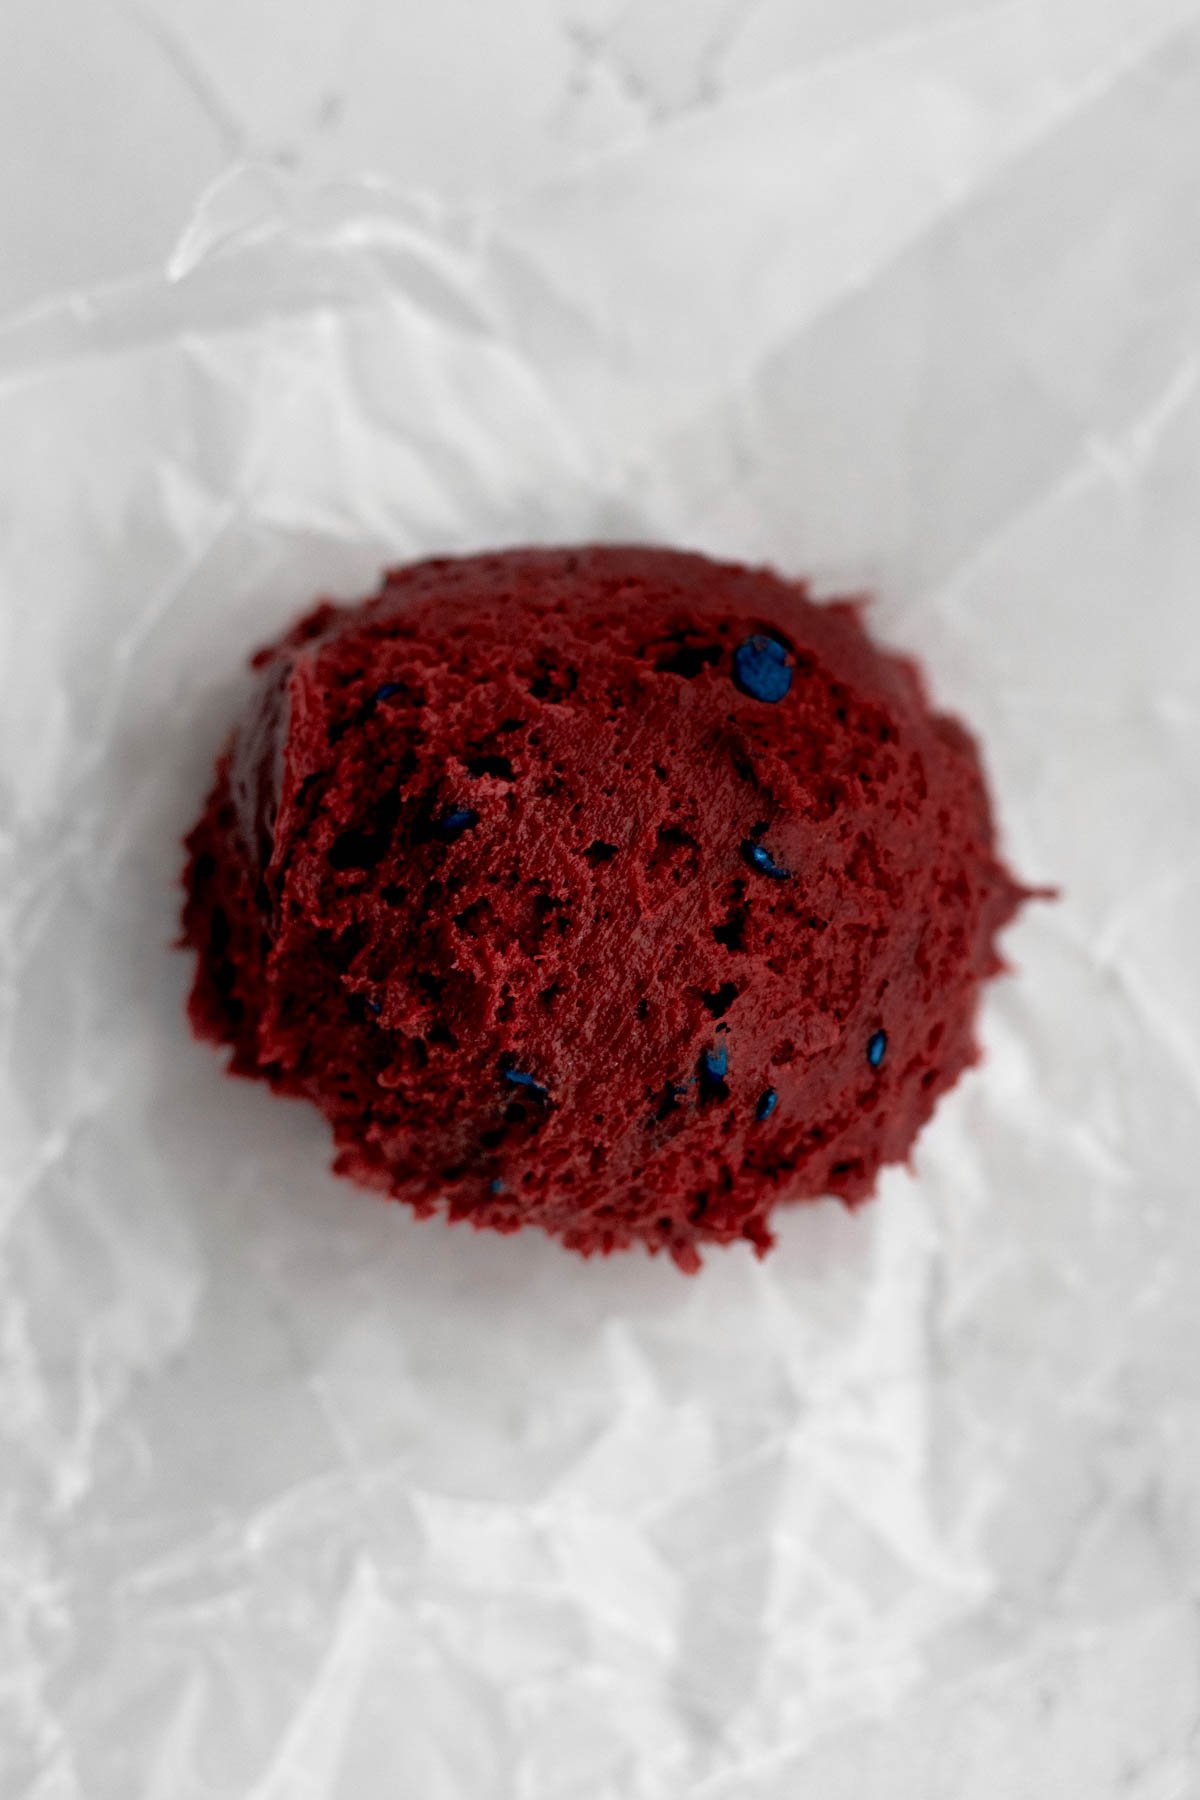 A scooped ball of red velvet cookie dough infused with blue sprinkles.